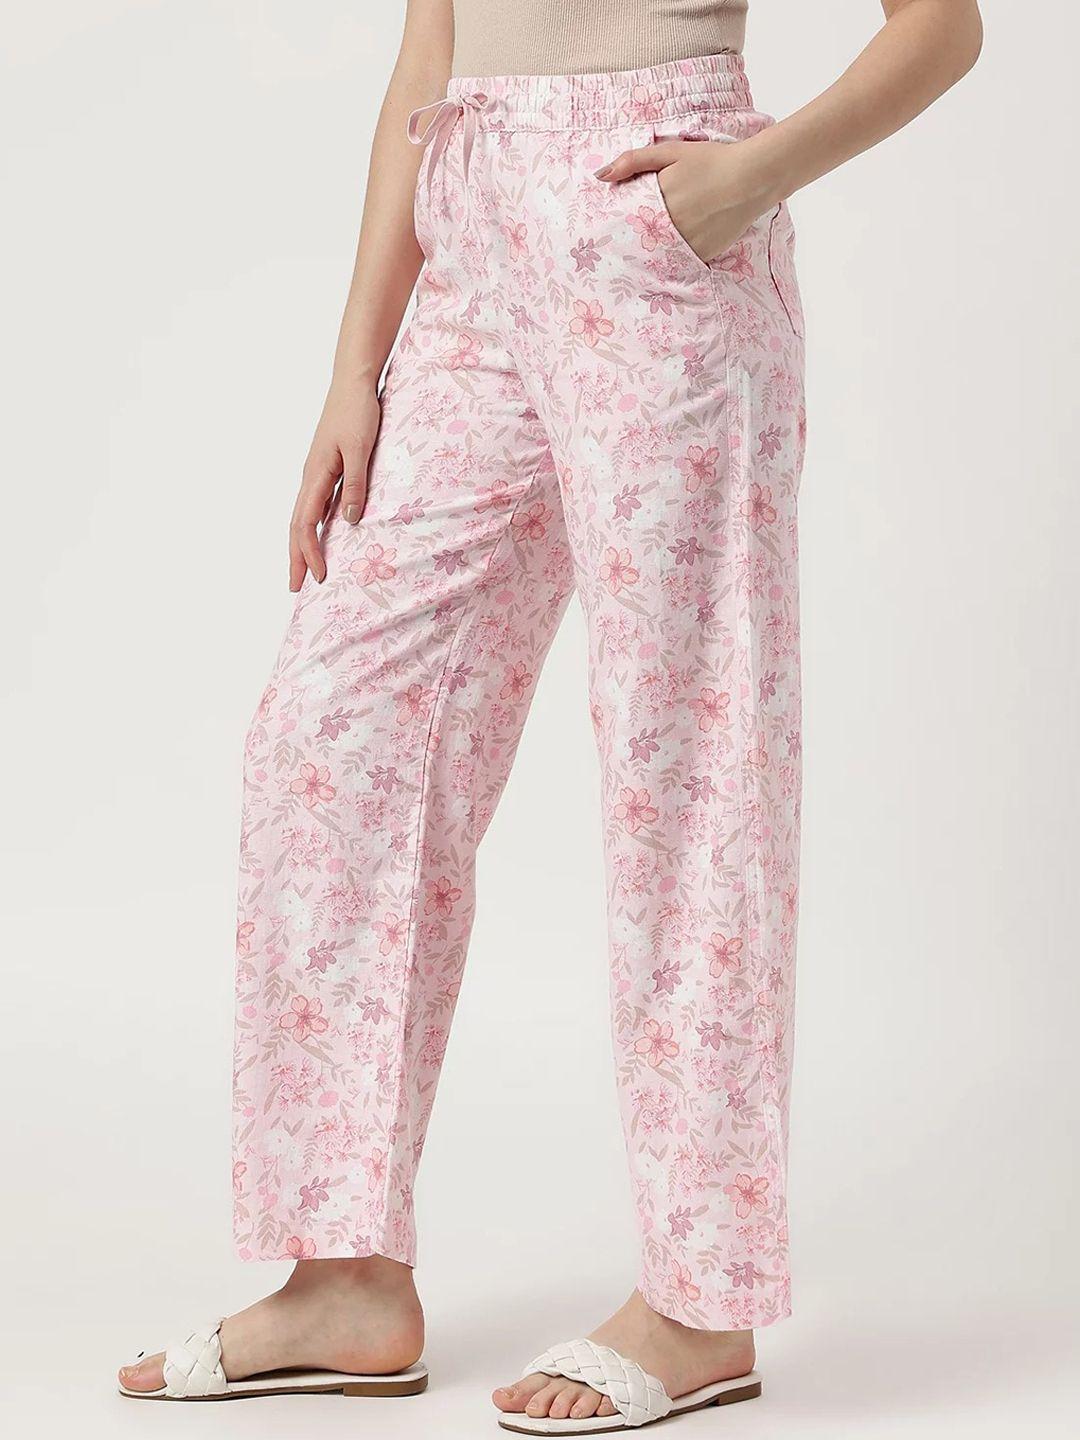 marks-&-spencer-women-floral-printed-straight-fit-high-rise-trousers